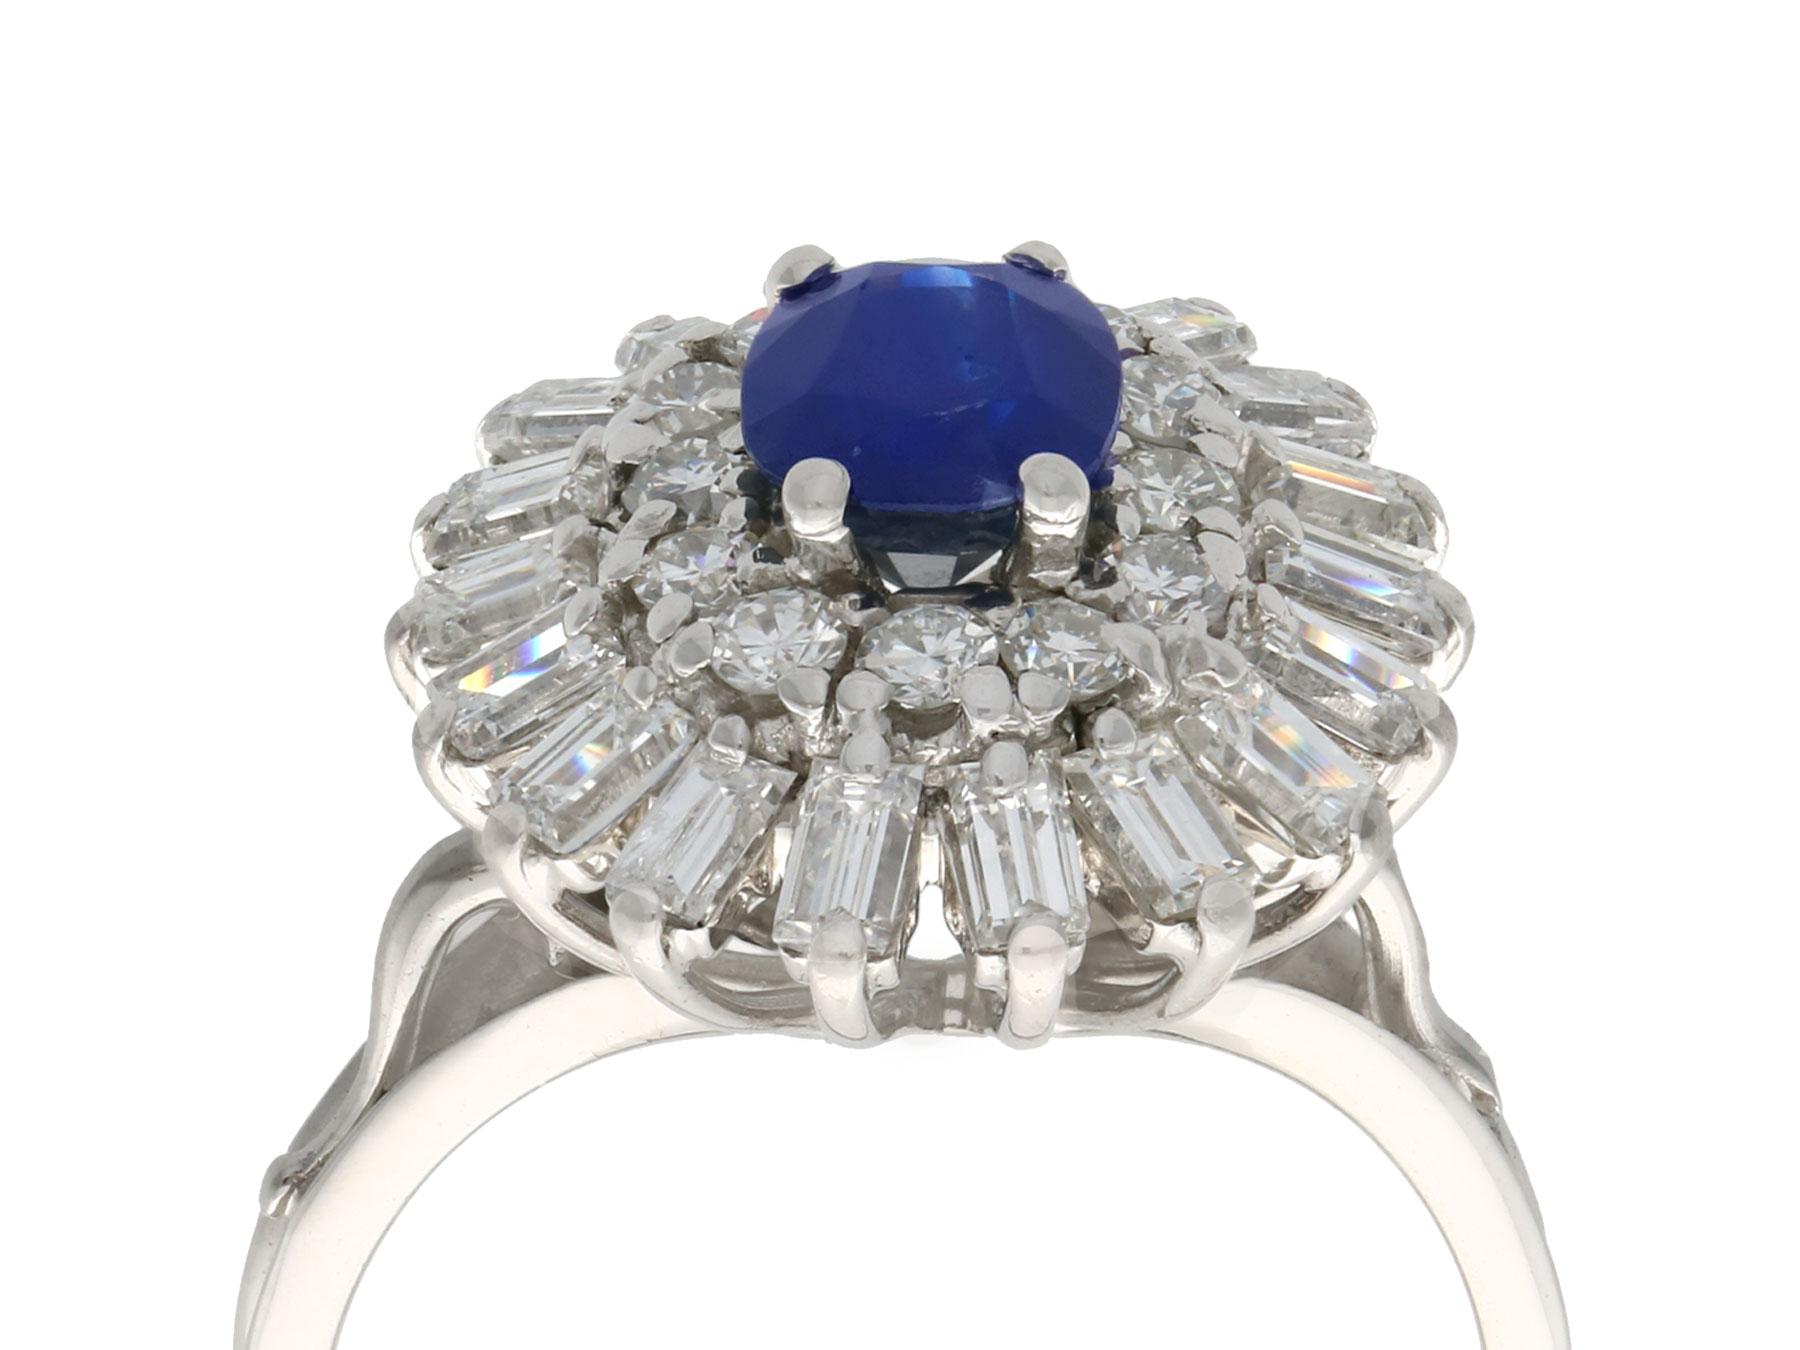 A fine and impressive vintage 1.25 carat natural blue sapphire and 1.15 carat diamond, 18 karat white gold cocktail ring; part of our vintage jewelry and estate jewelry collections

This impressive vintage sapphire and diamond cocktail ring has been